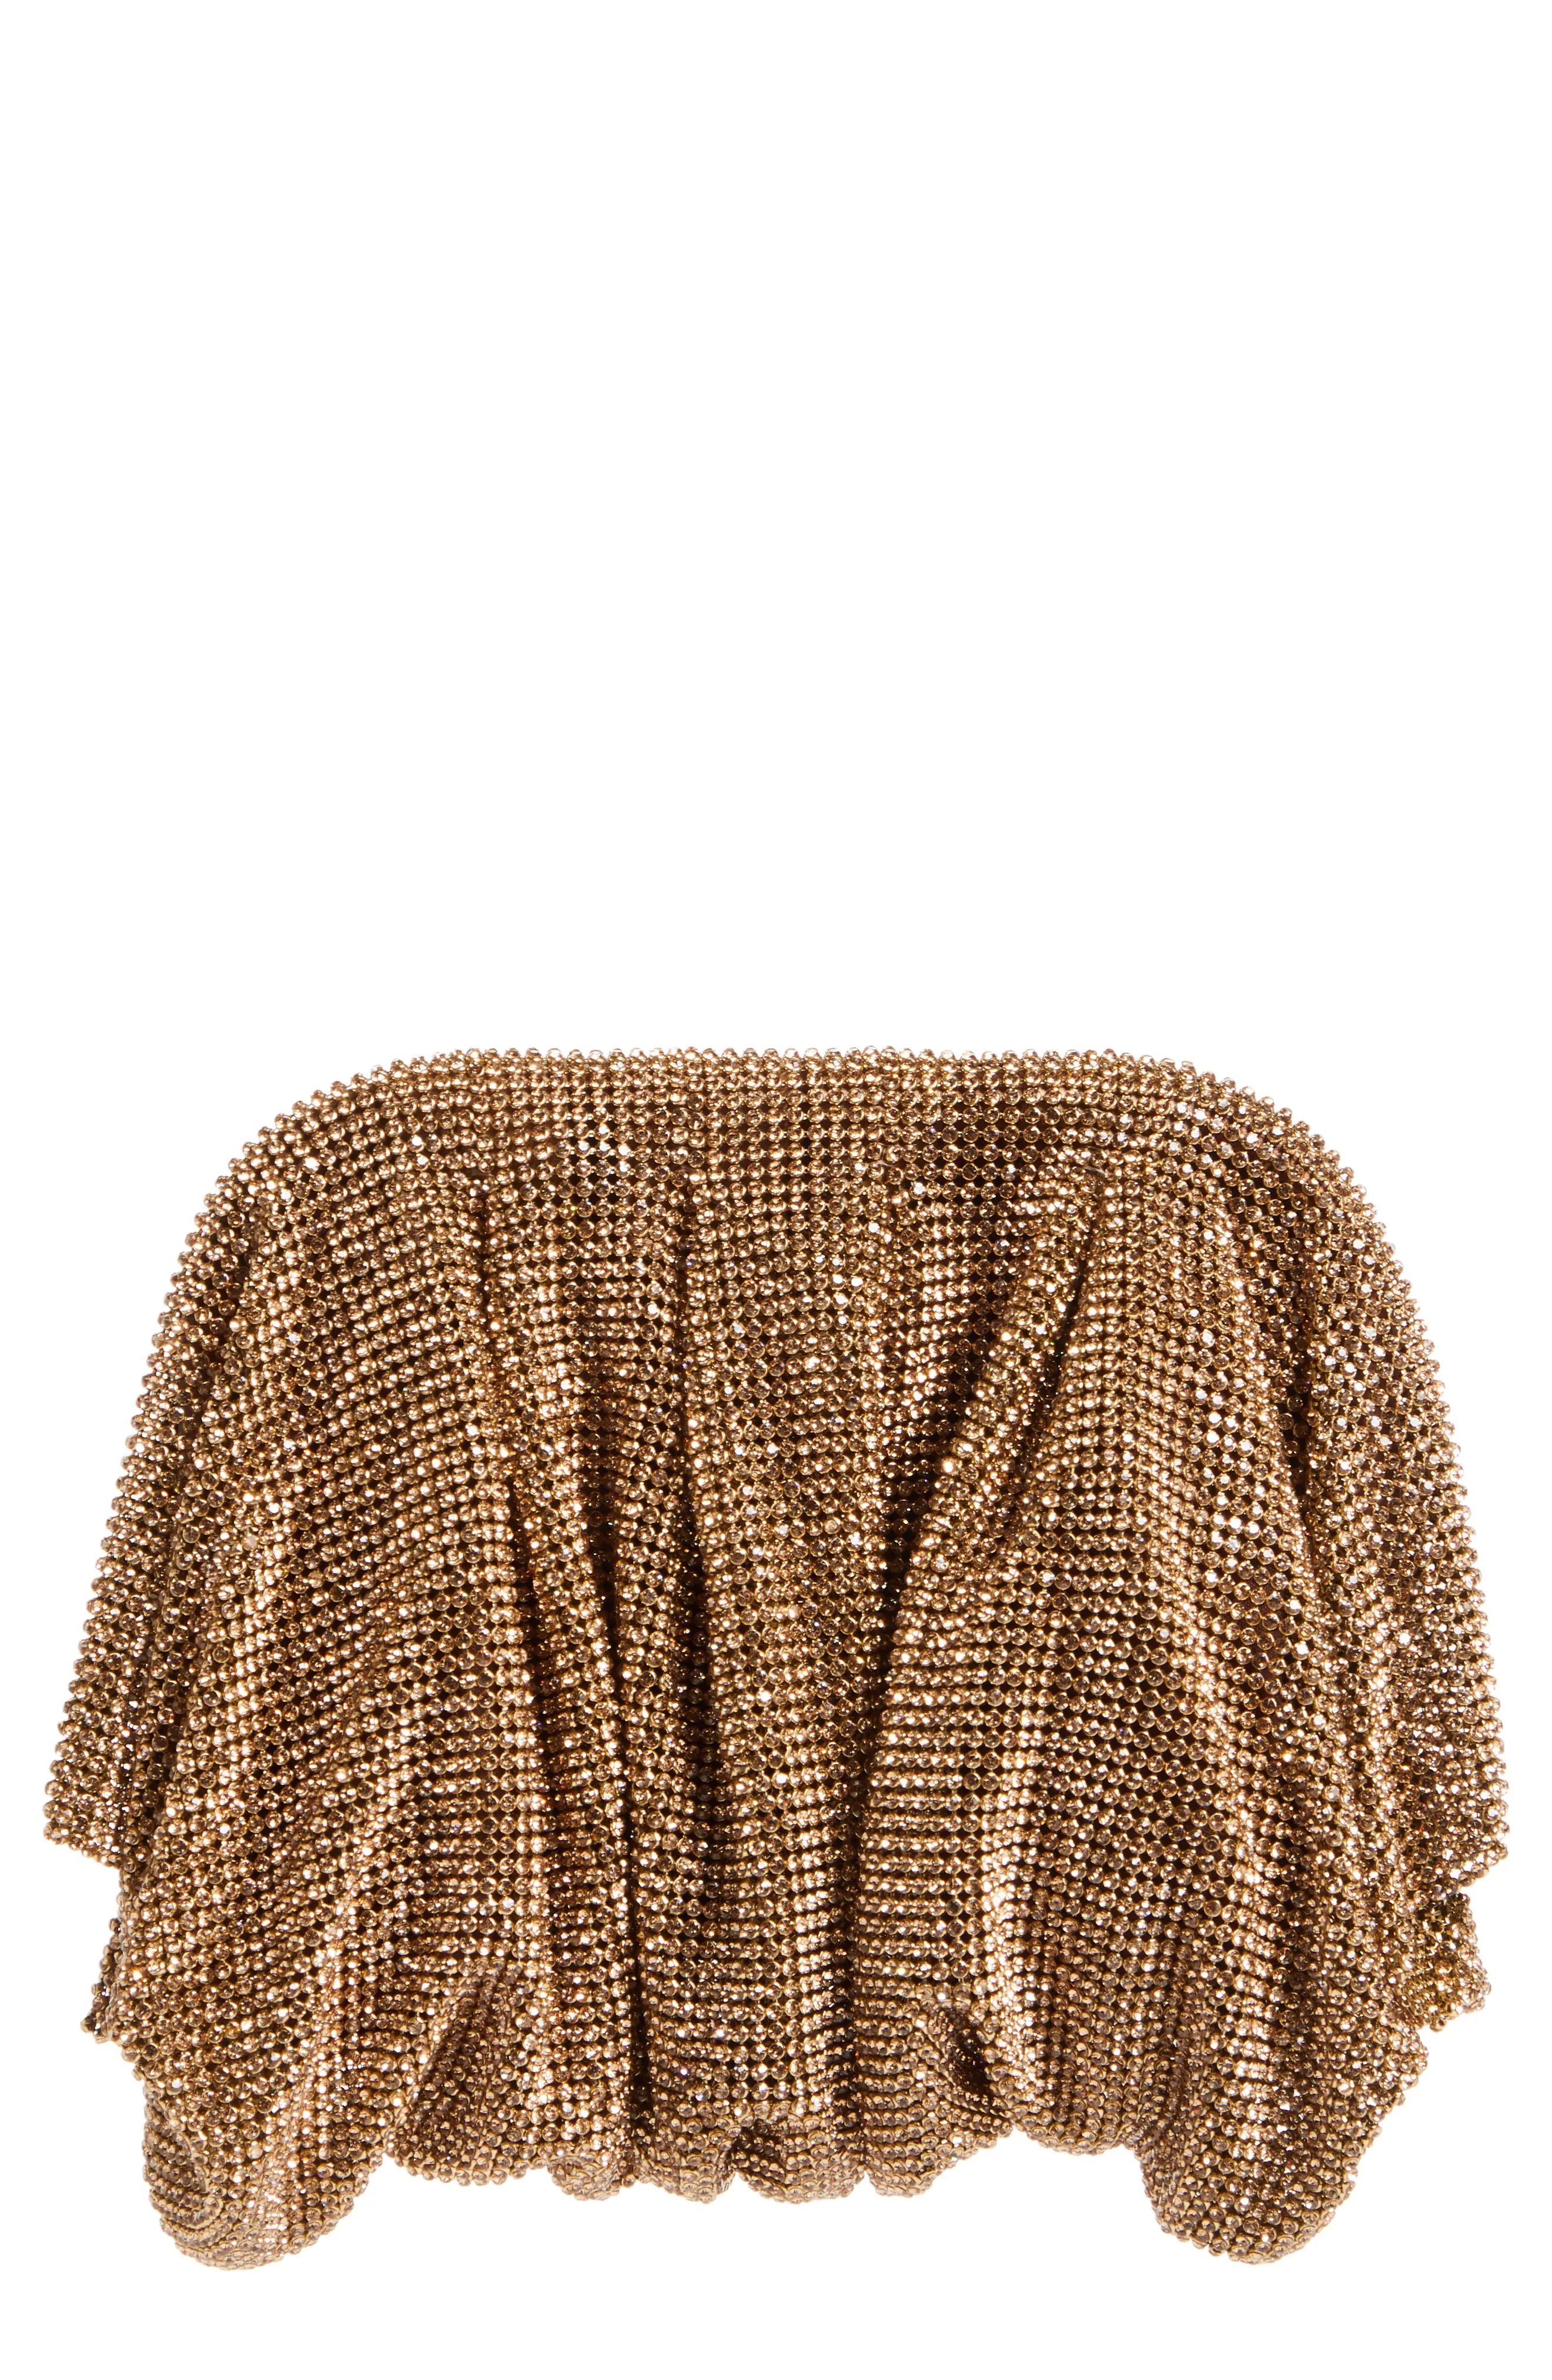 Benedetta Bruzziches La Petite Crystal Mesh Clutch in Dipping In Mousse at Nordstrom | Nordstrom